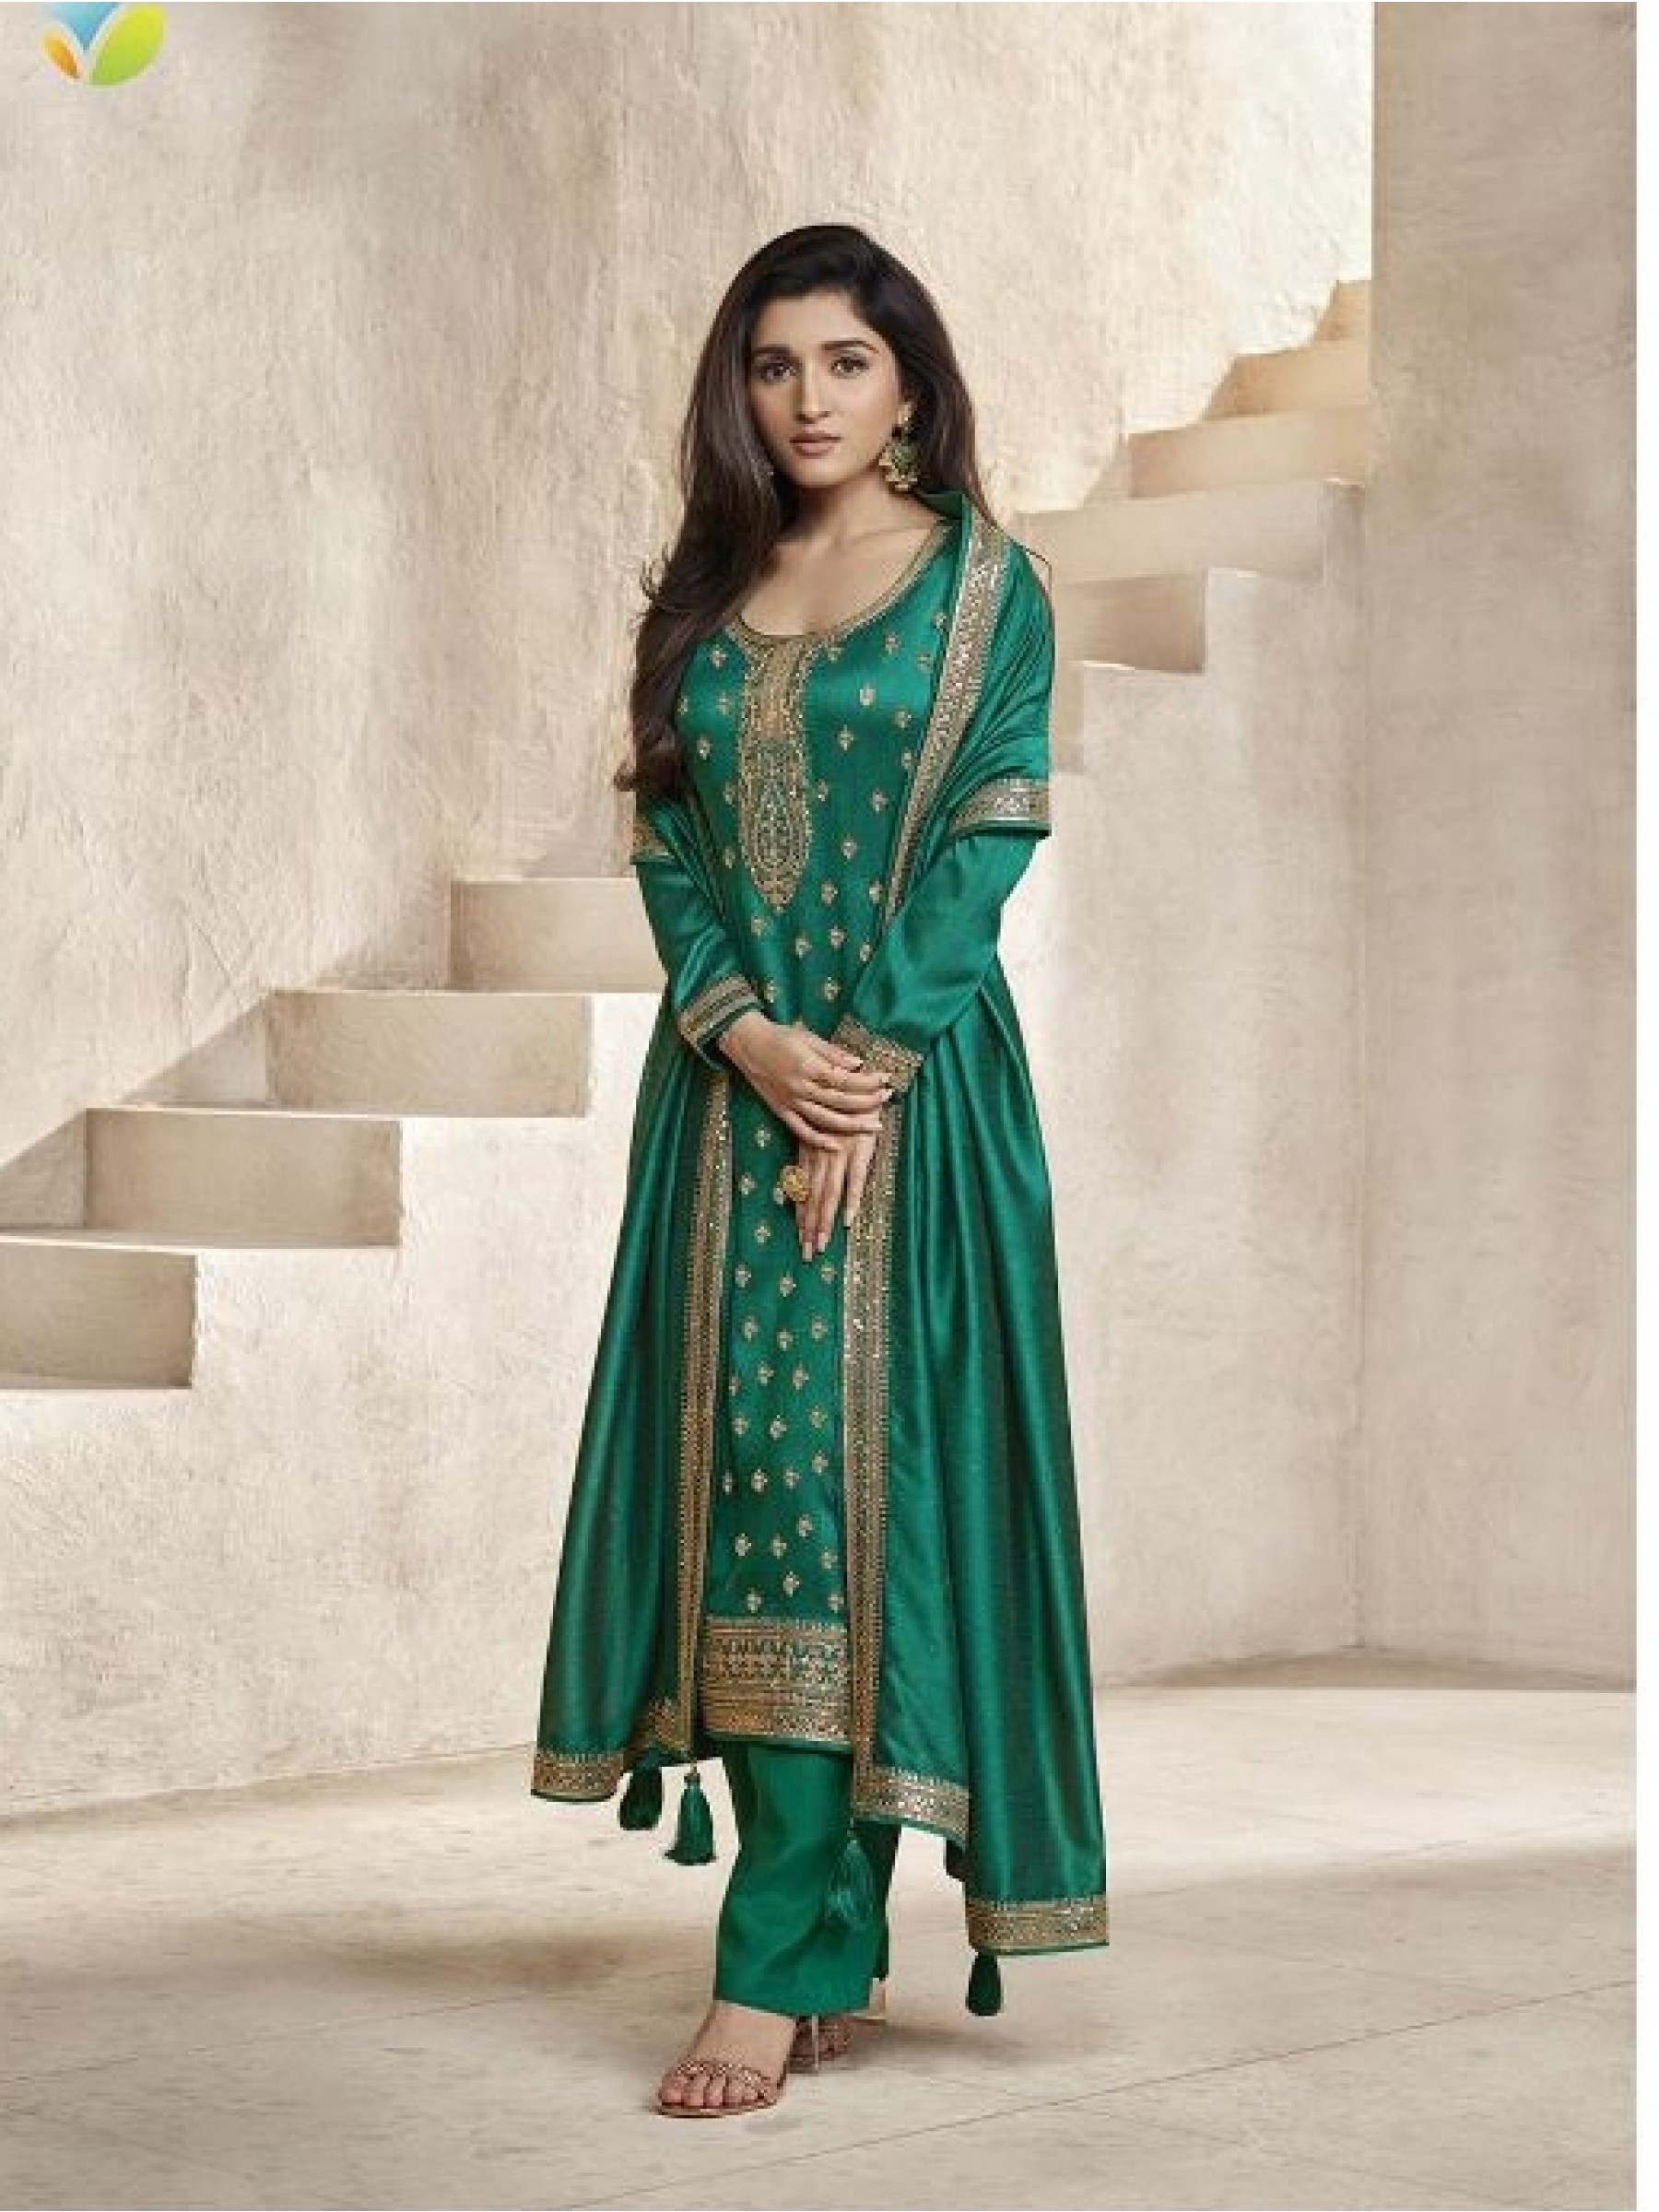  Silk Georgette  Party Wear Suit in Turquoise Color with Embroidery Work